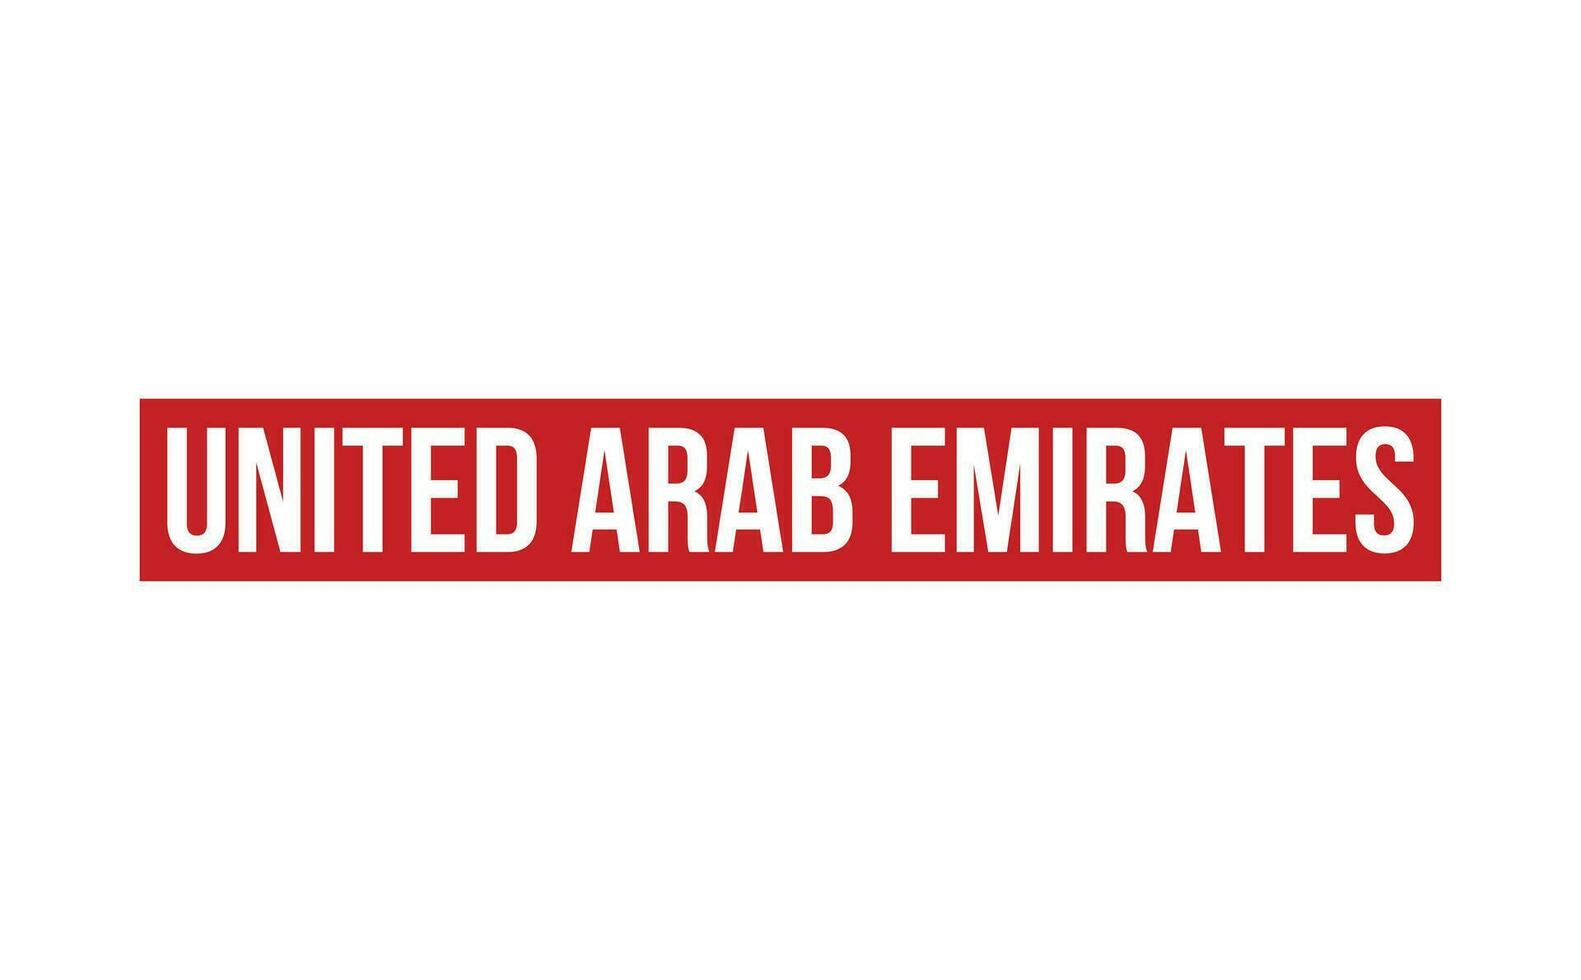 United Arab Emirates Rubber Stamp Seal Vector